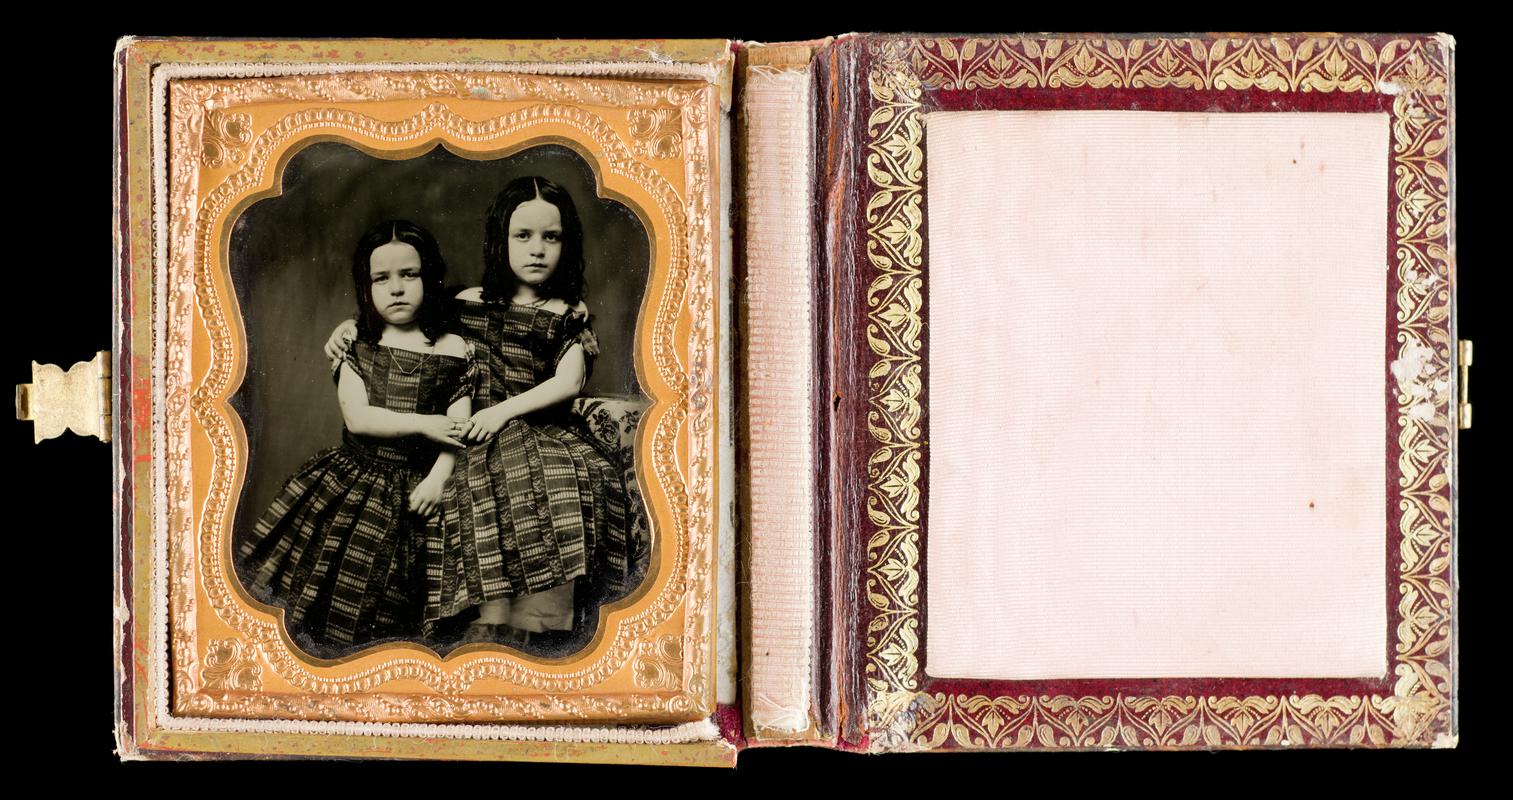 Case with portrait of two young girls